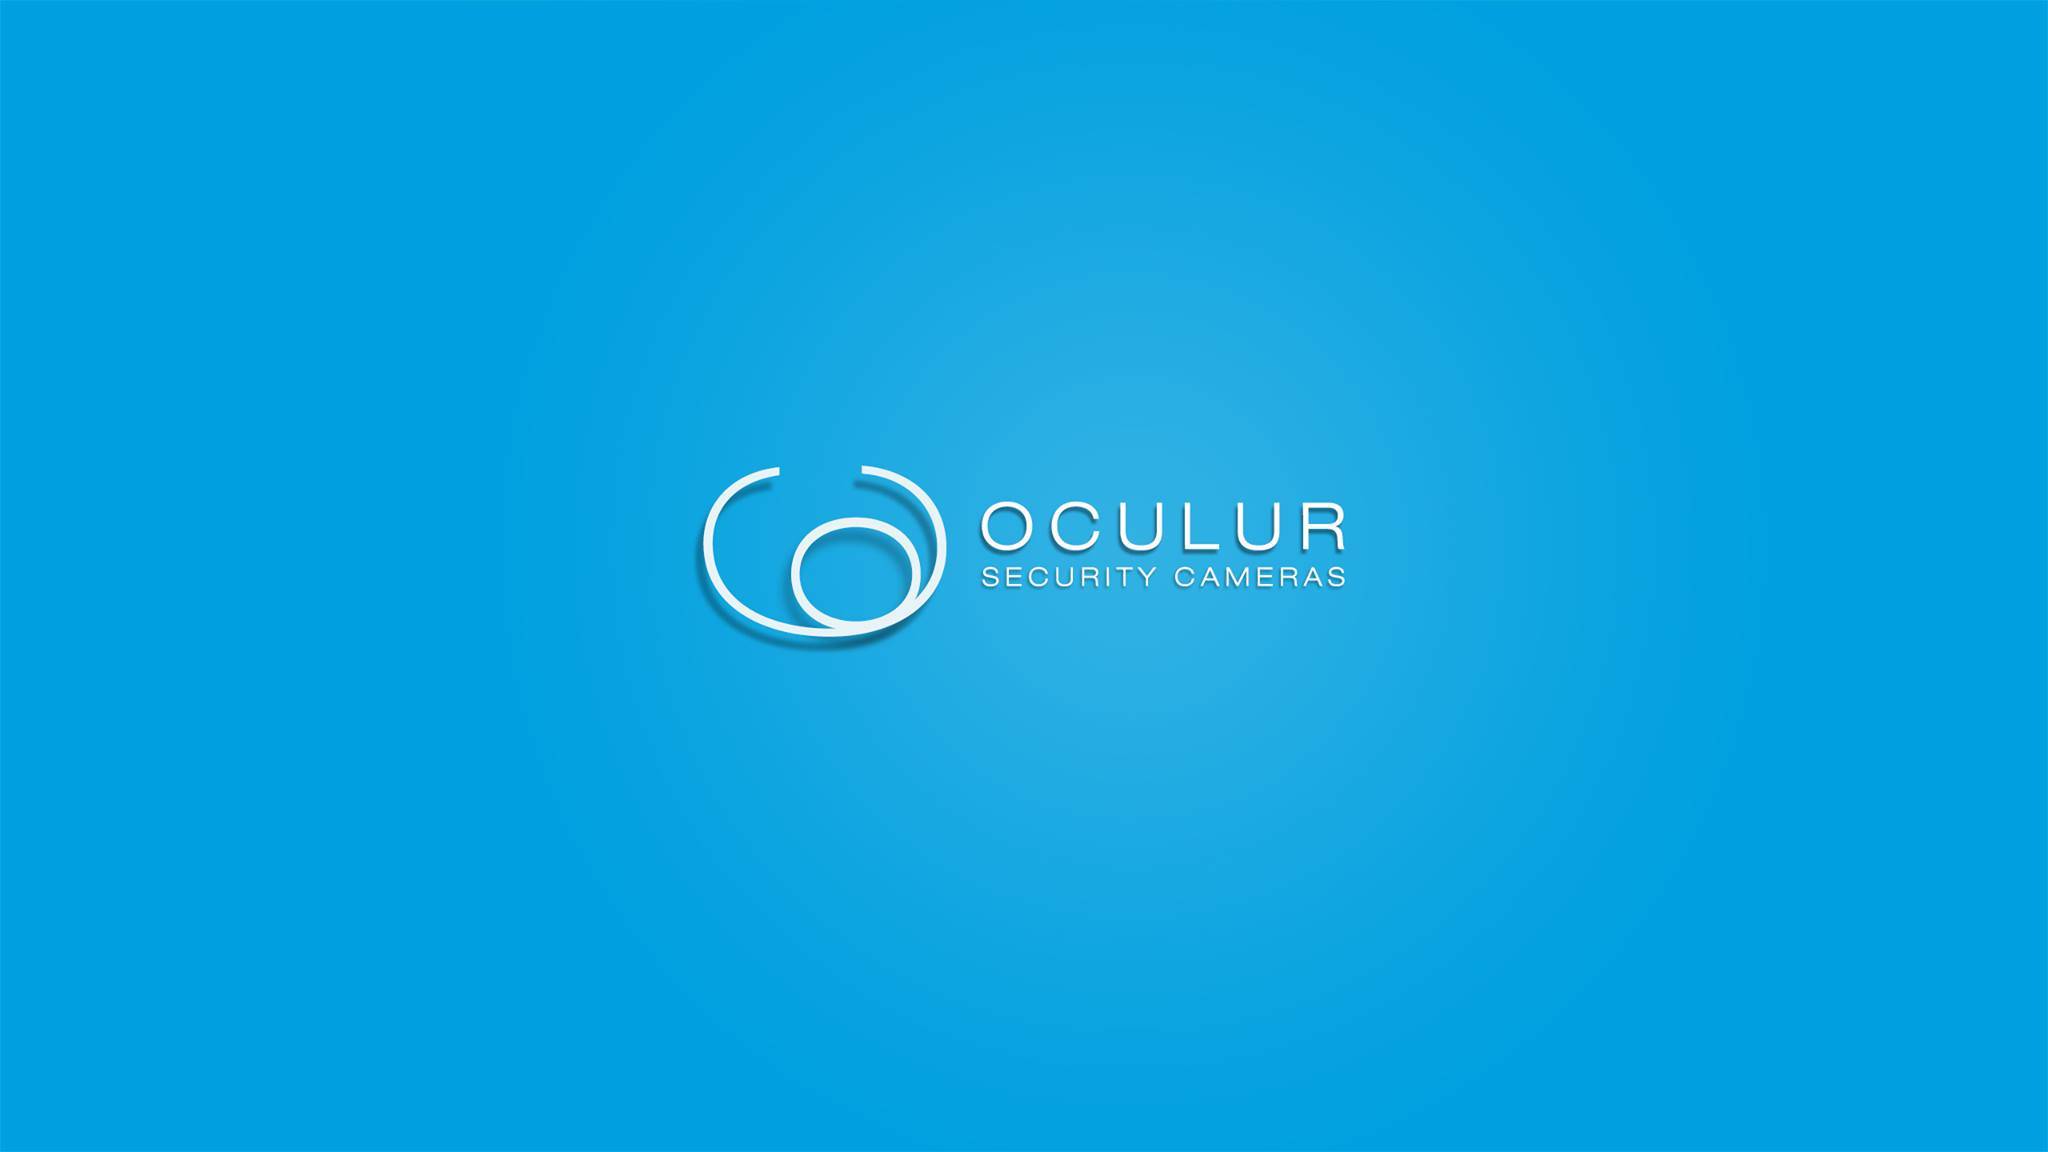 Oculur Introduces POE+ Allowing 820 Feet of Travel